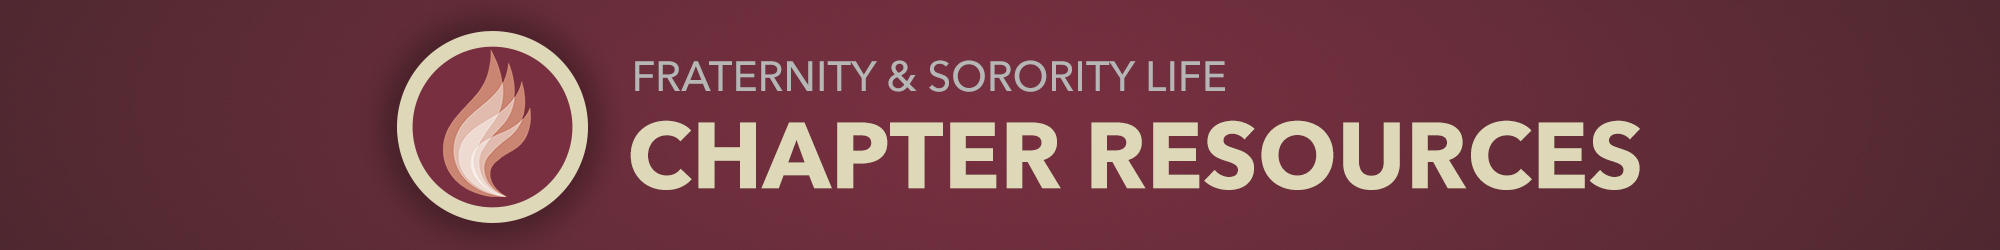 Chapter Resources Banner